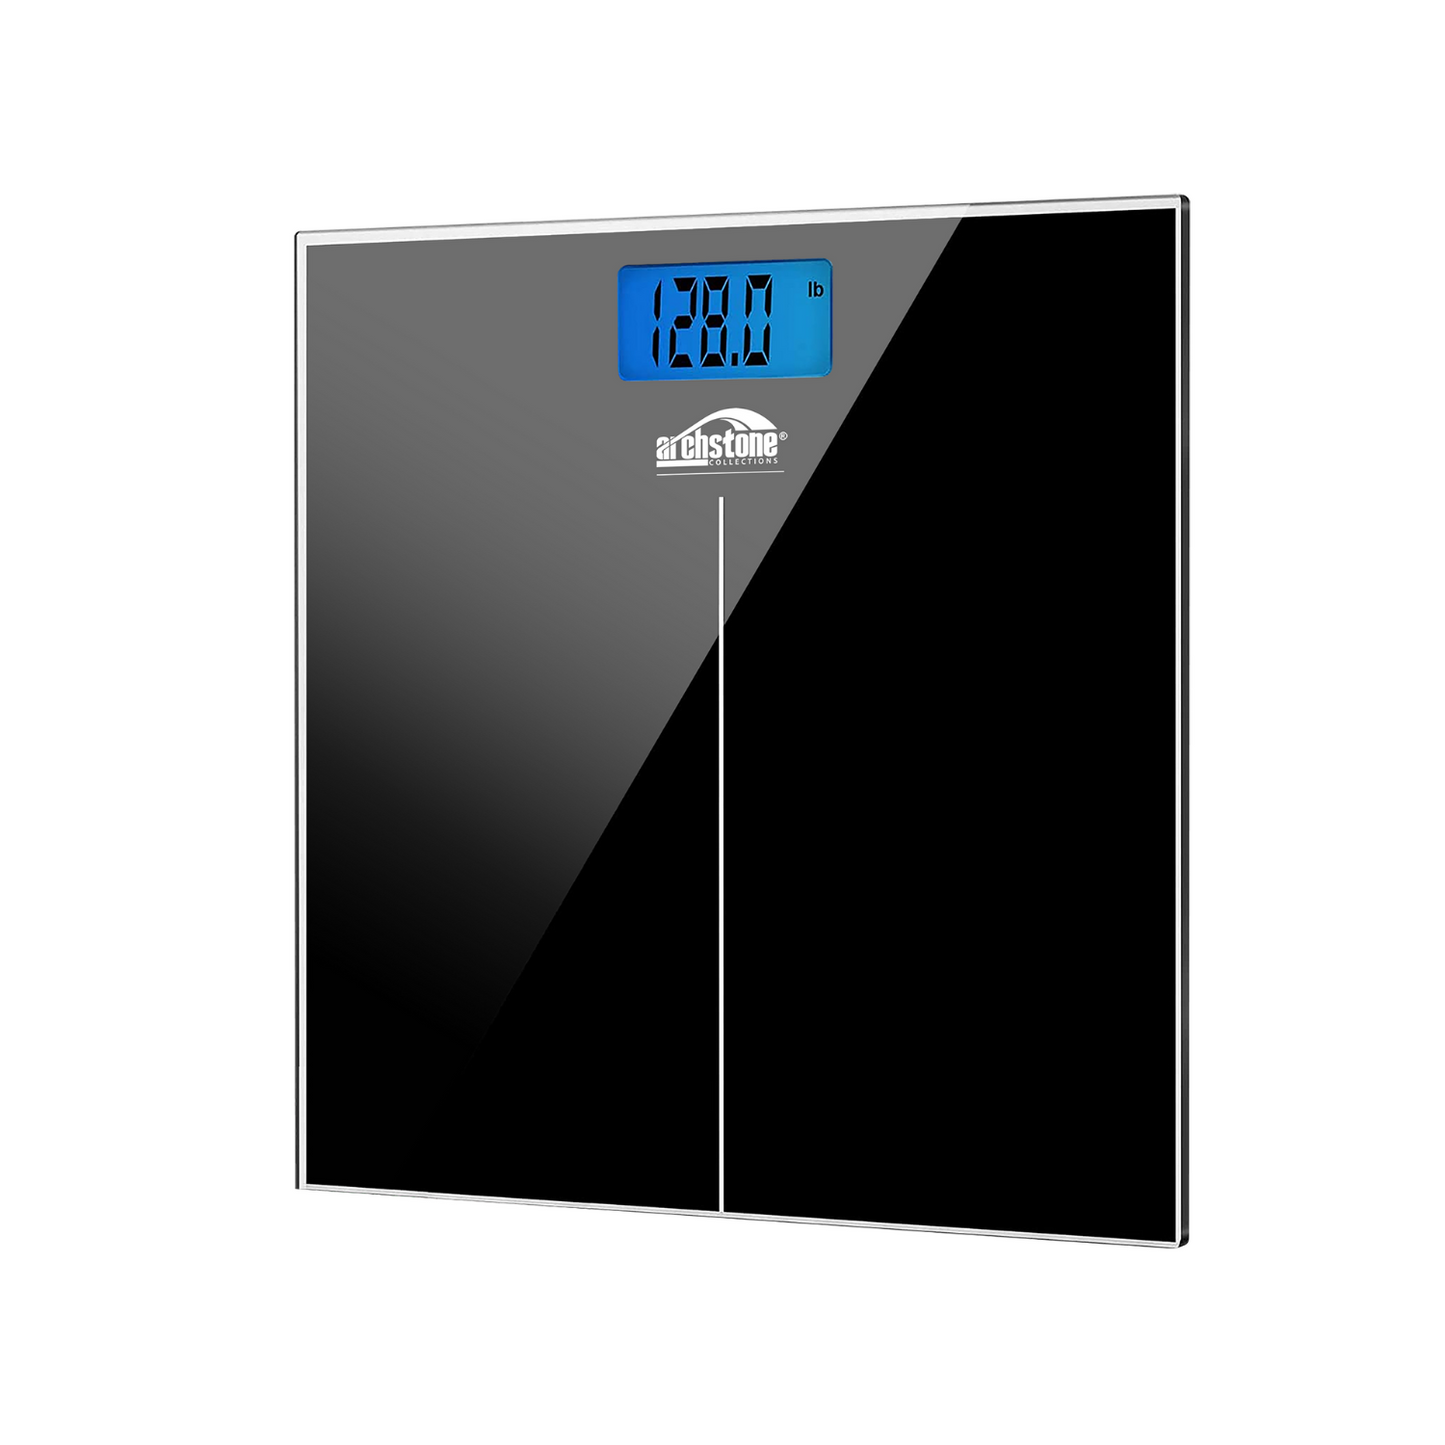 Bathroom Scale - LCD Backlighting and Tempered Glass